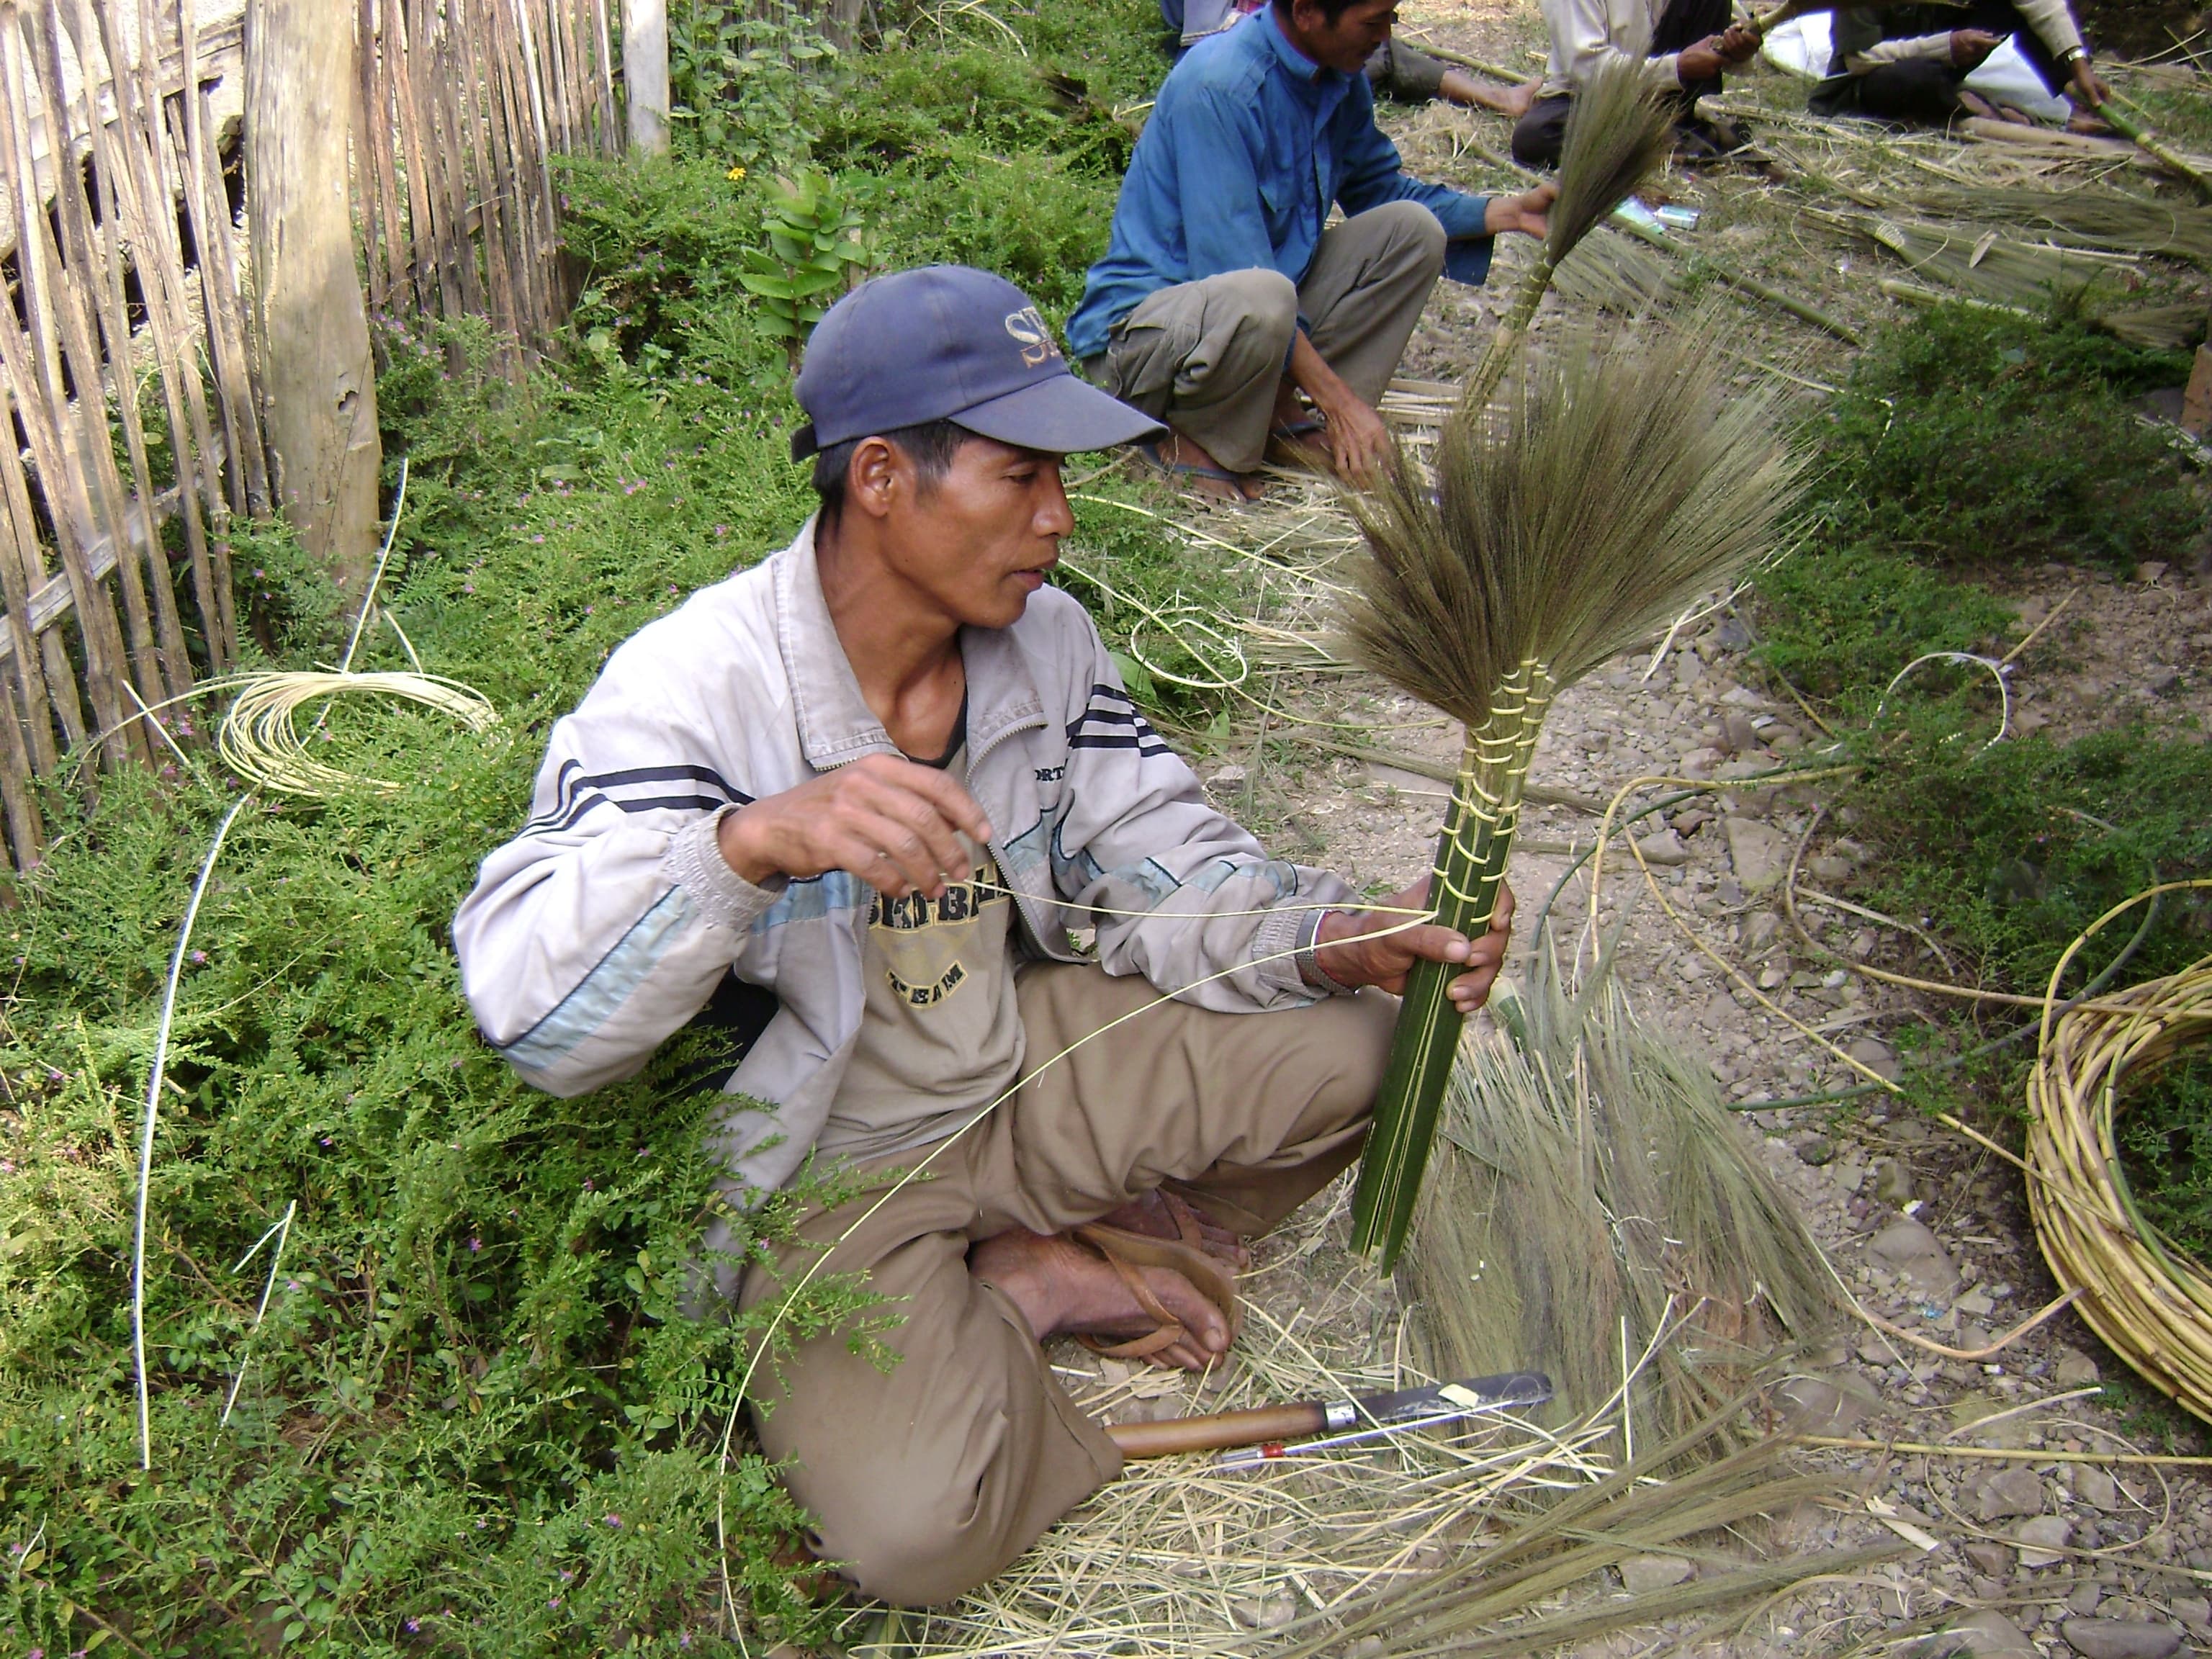 A man sits on the ground with open shoes and is weaving plants using bamboo and string. There are several other men behind him who are also weaving.